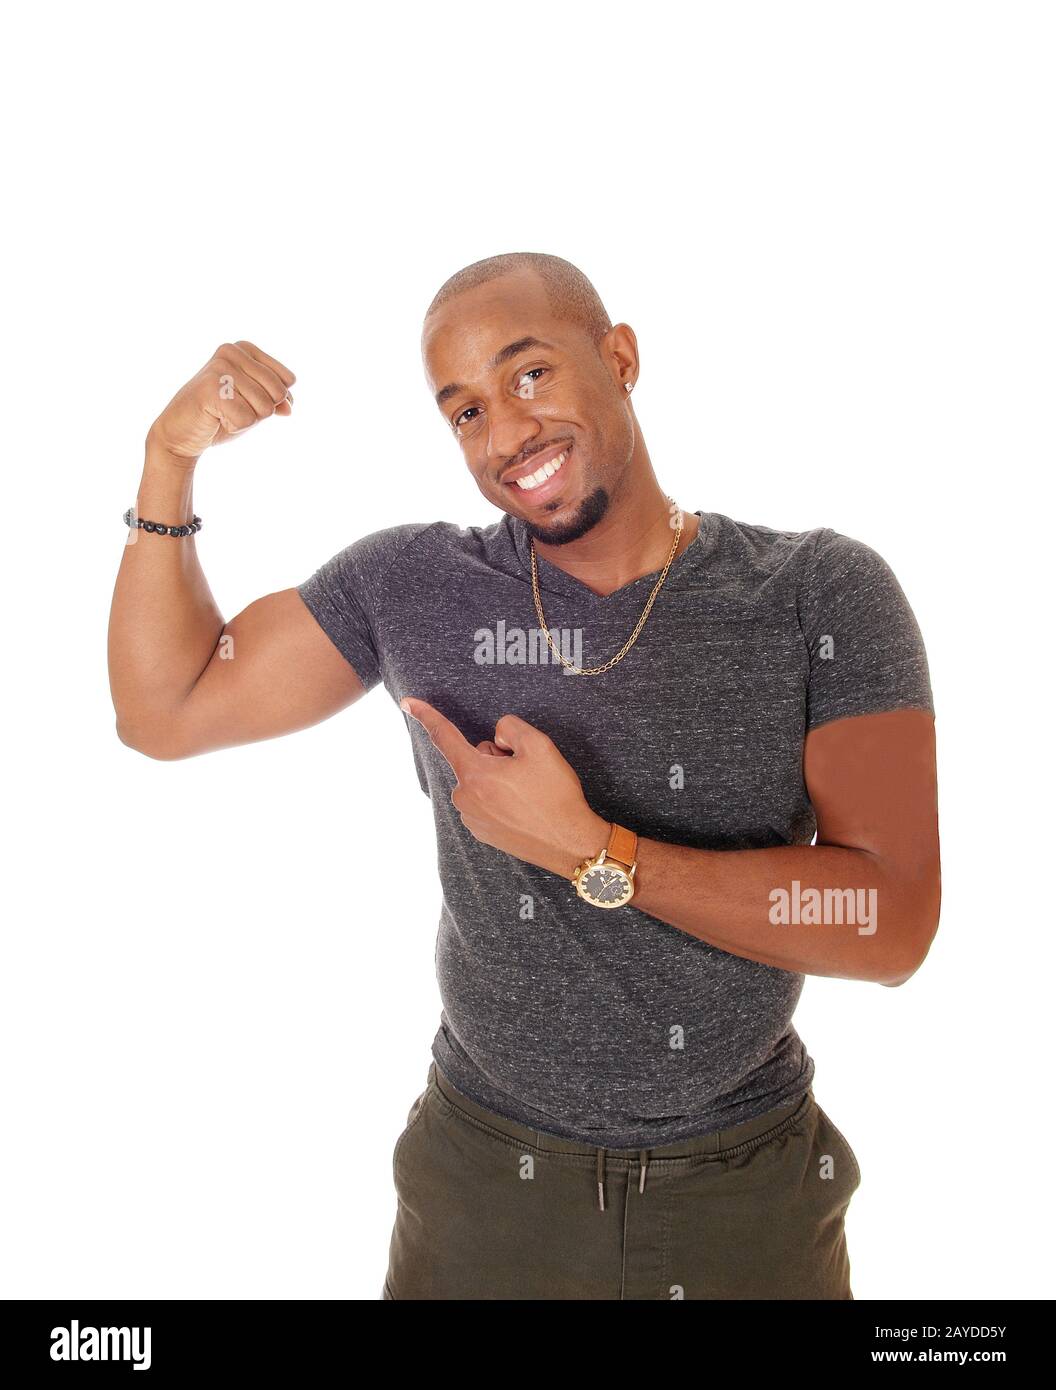 African man showing his muscles and smiling Stock Photo